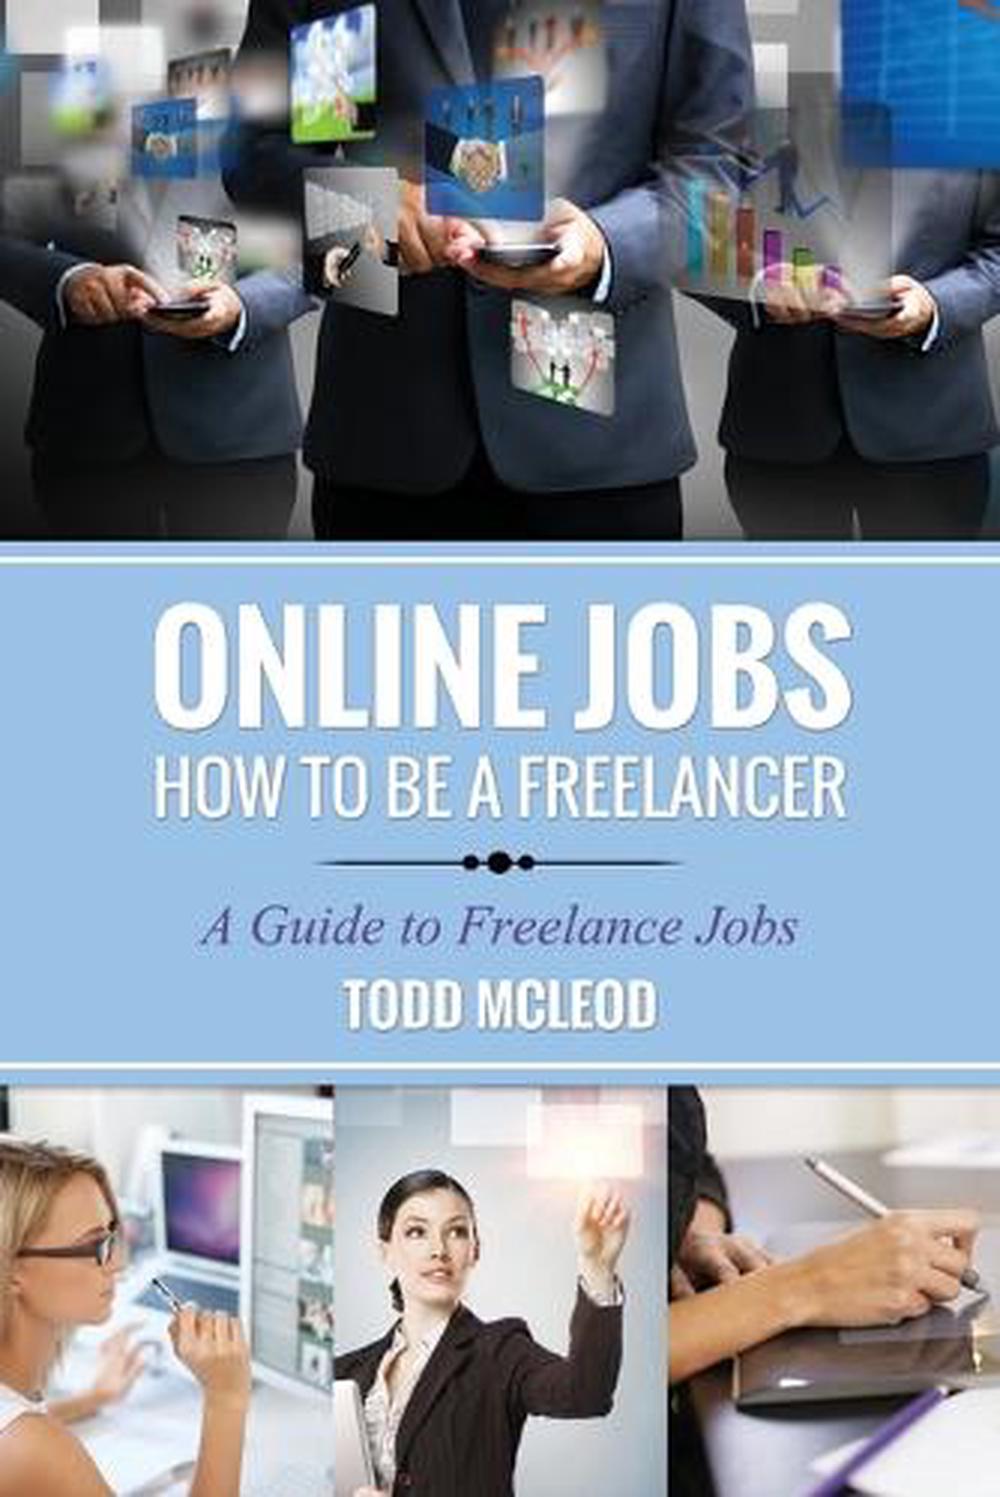  Online  Jobs  How to Be a Freelancer  a Guide to Freelance  